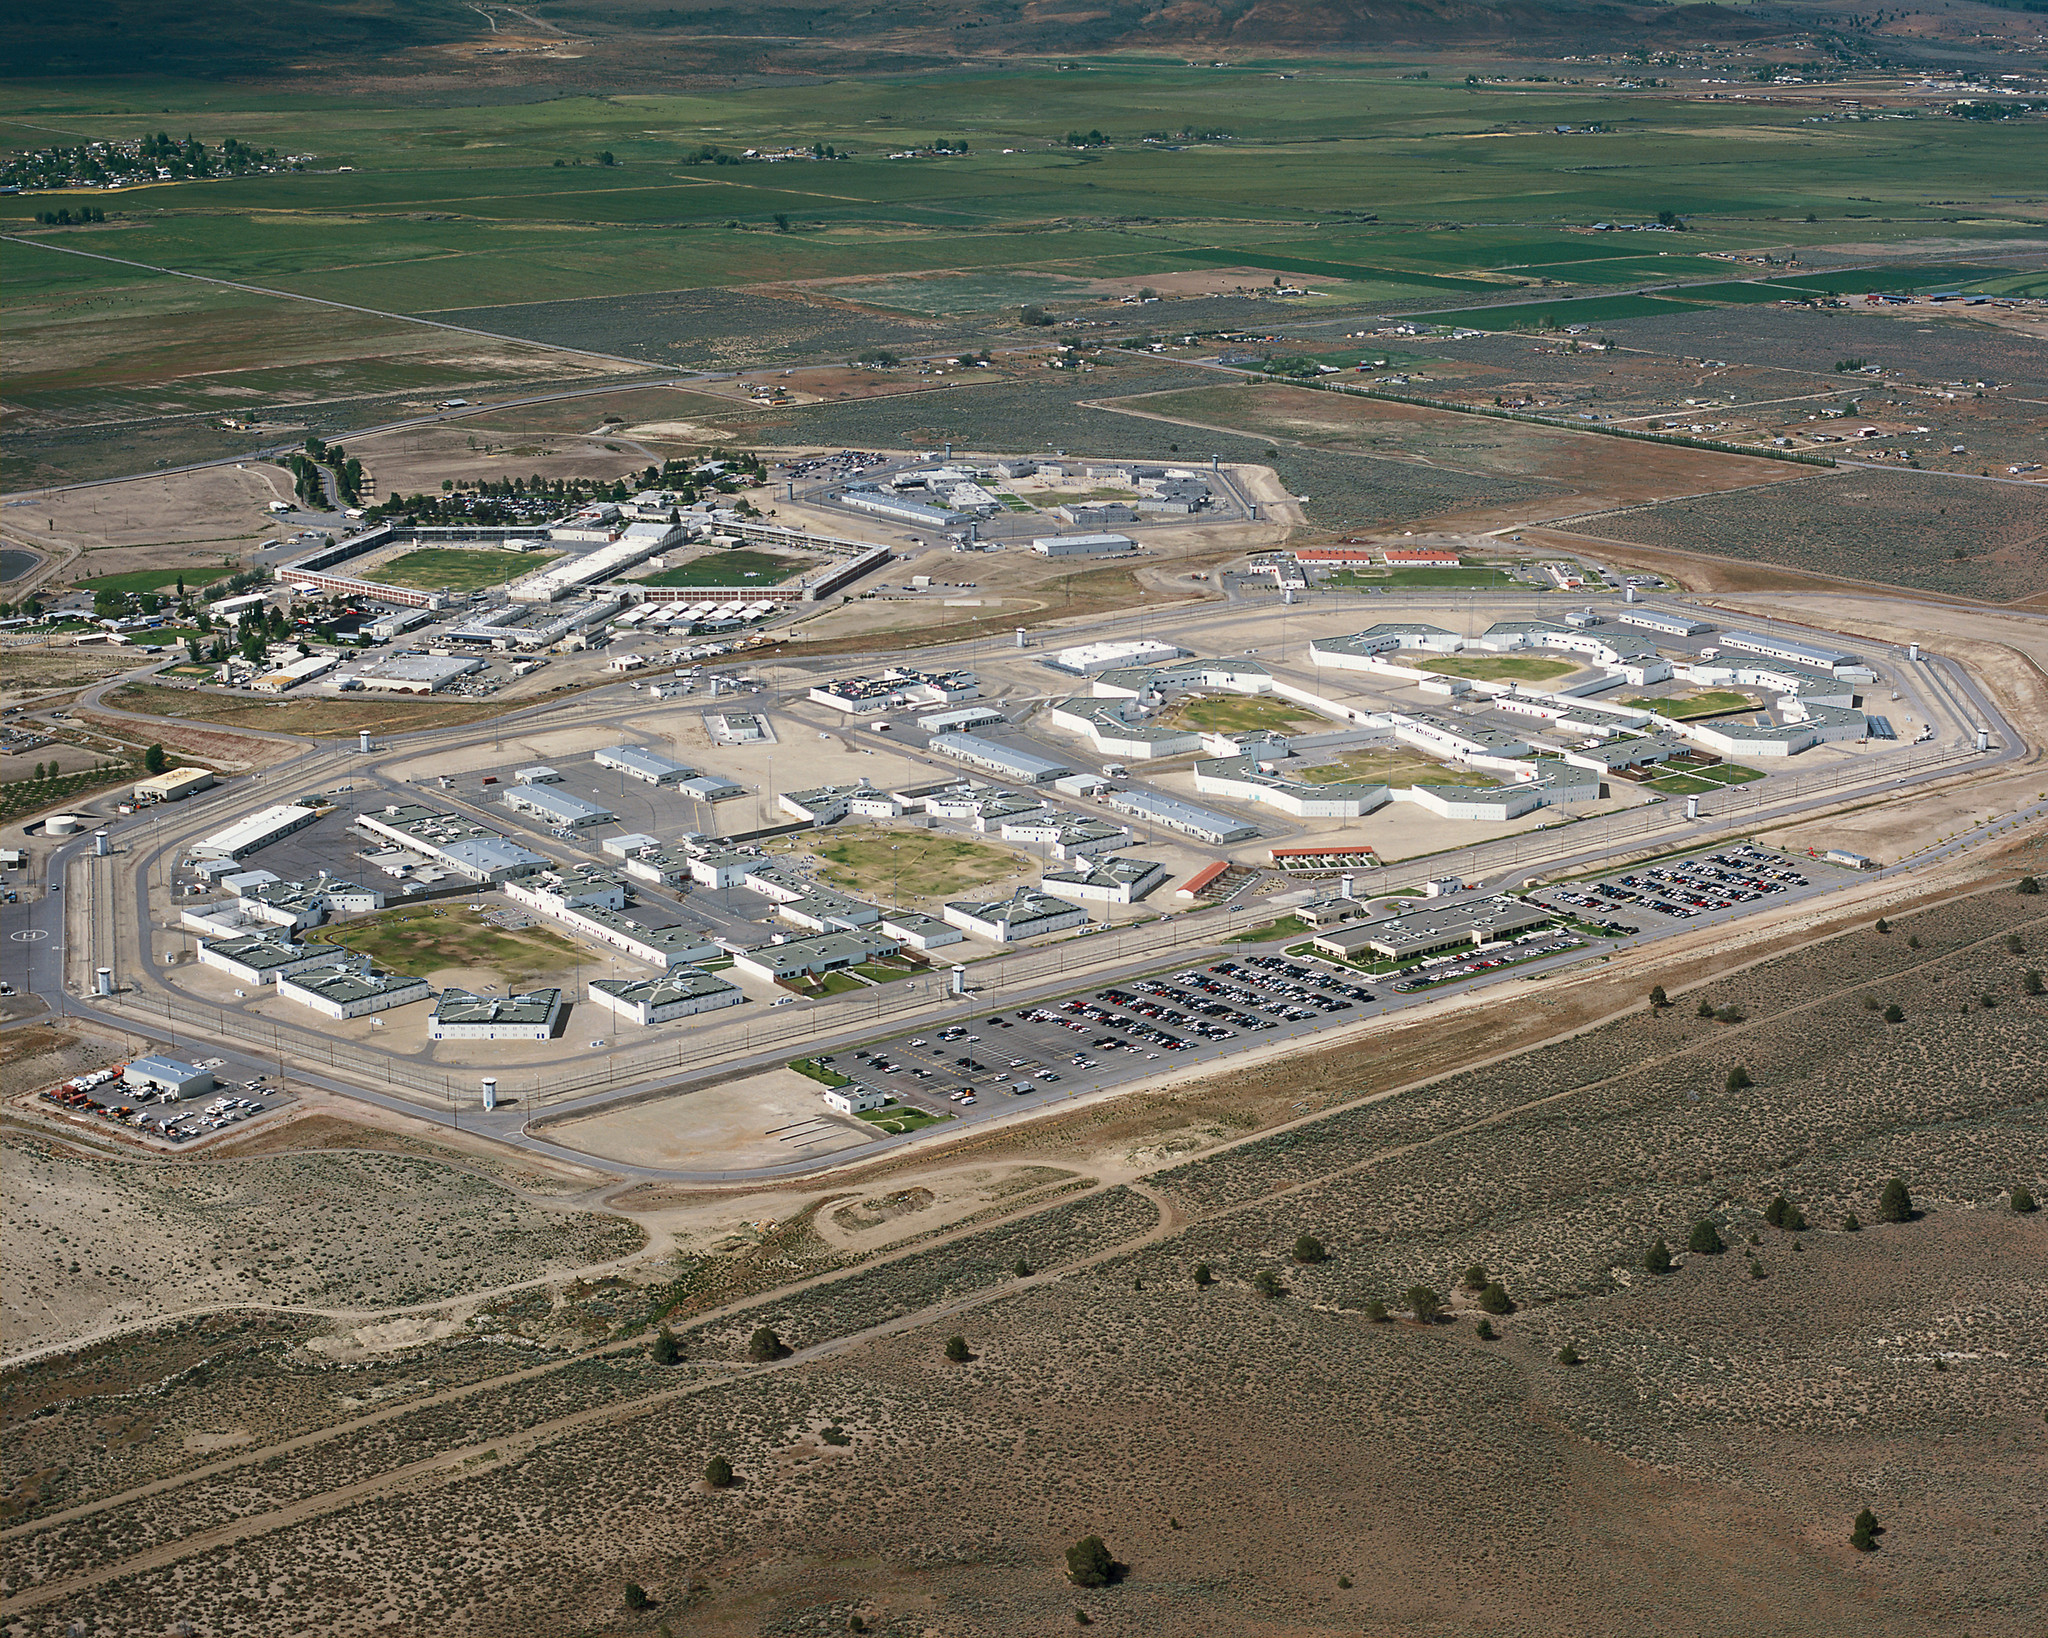 What are some state-run correctional facilities in California?